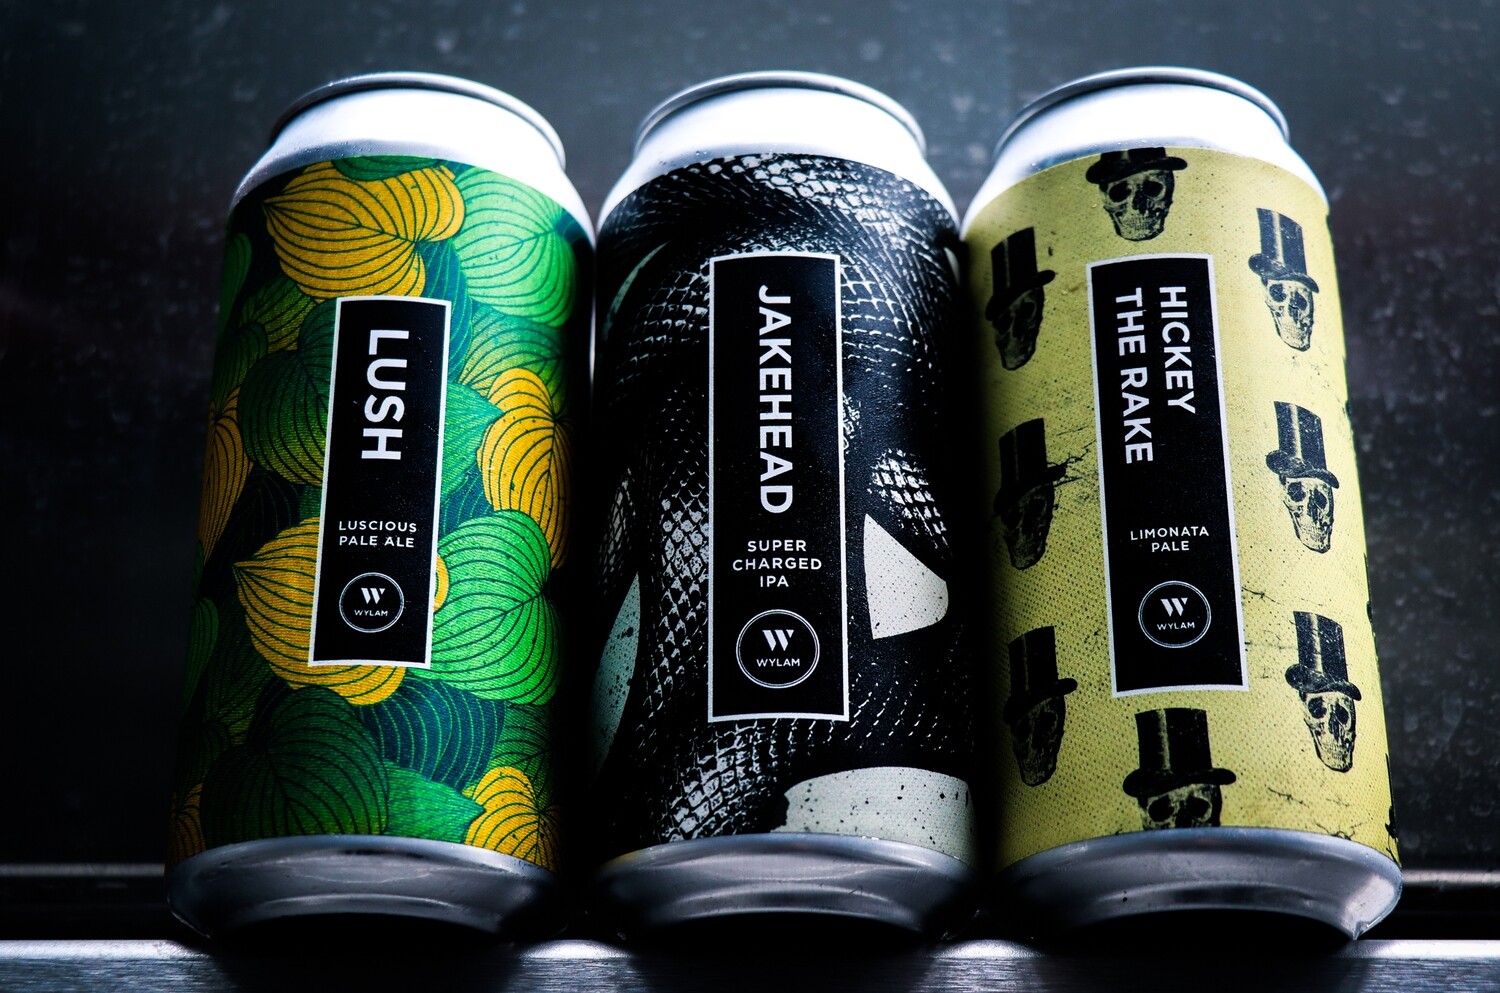 The Core Pack | 3 x 440ml Cans + 1 Free 'W' Glass